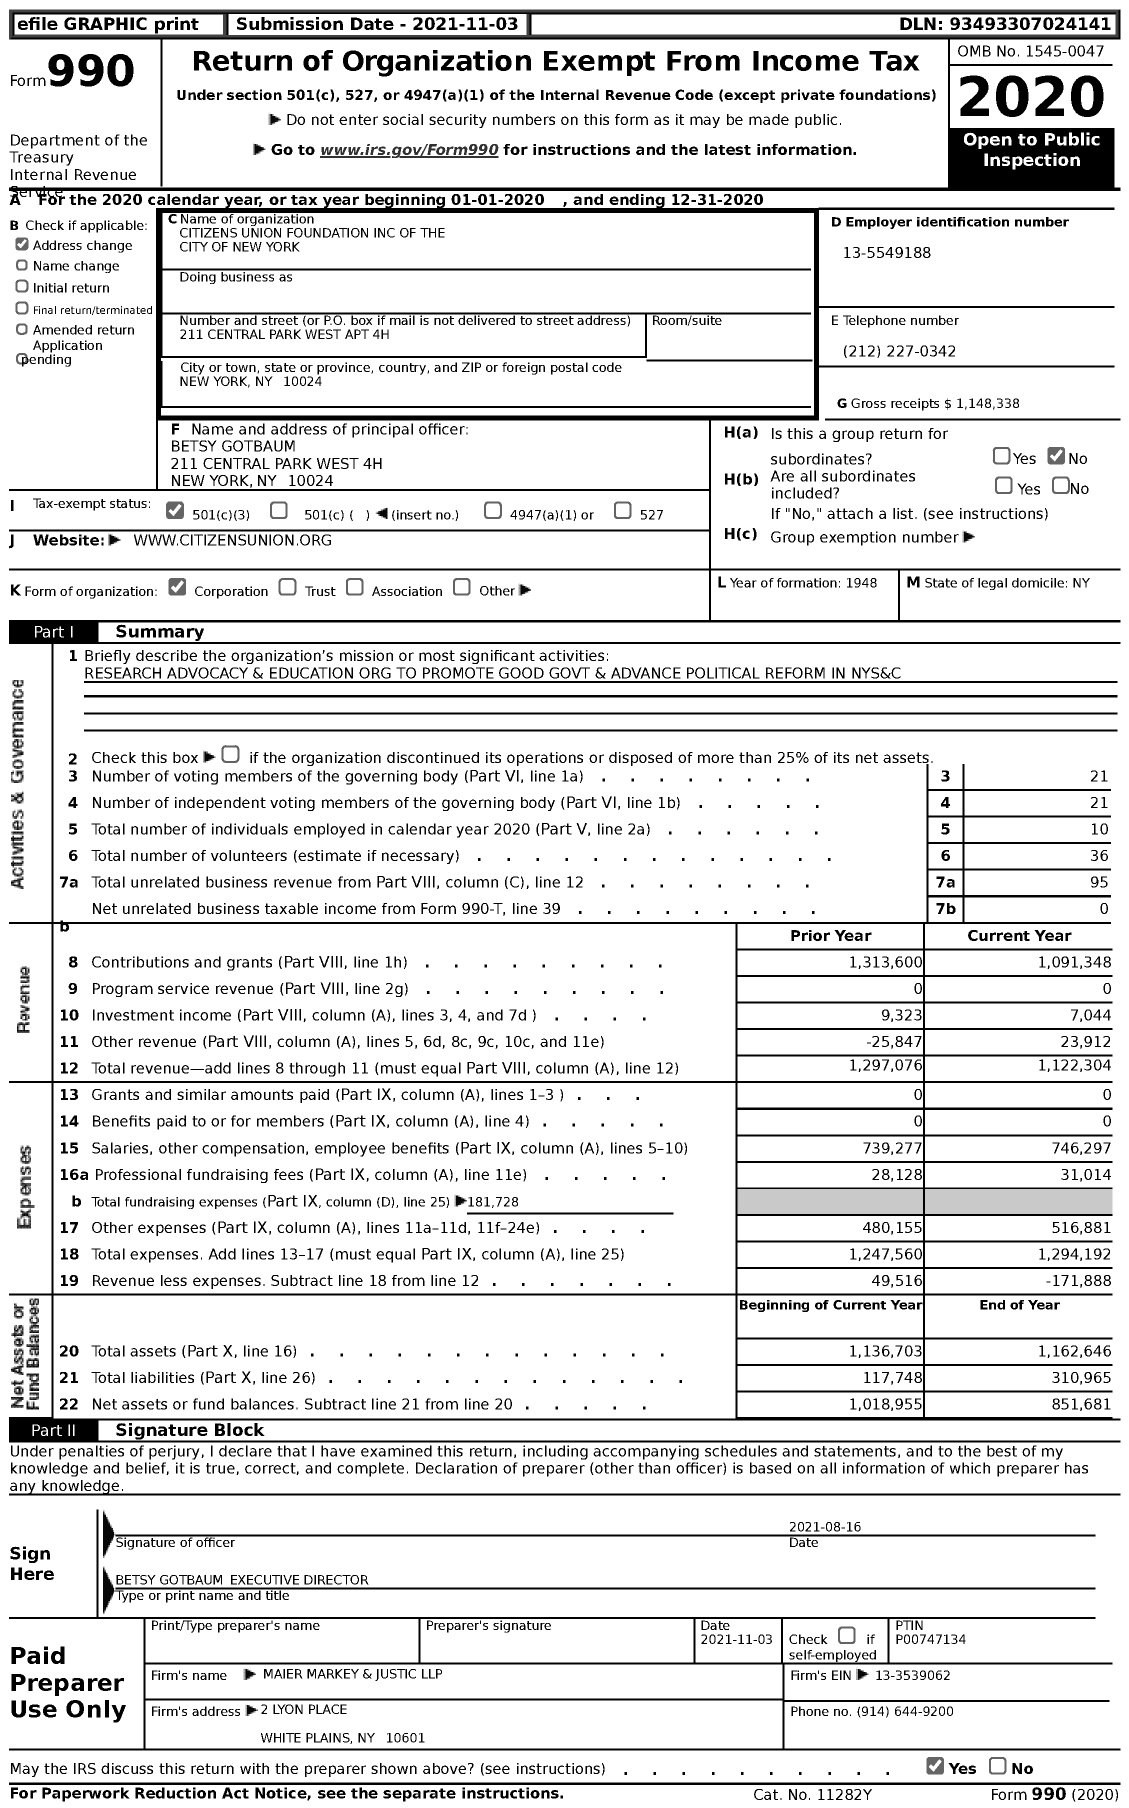 Image of first page of 2020 Form 990 for Citizens Union Foundation of the City of New York